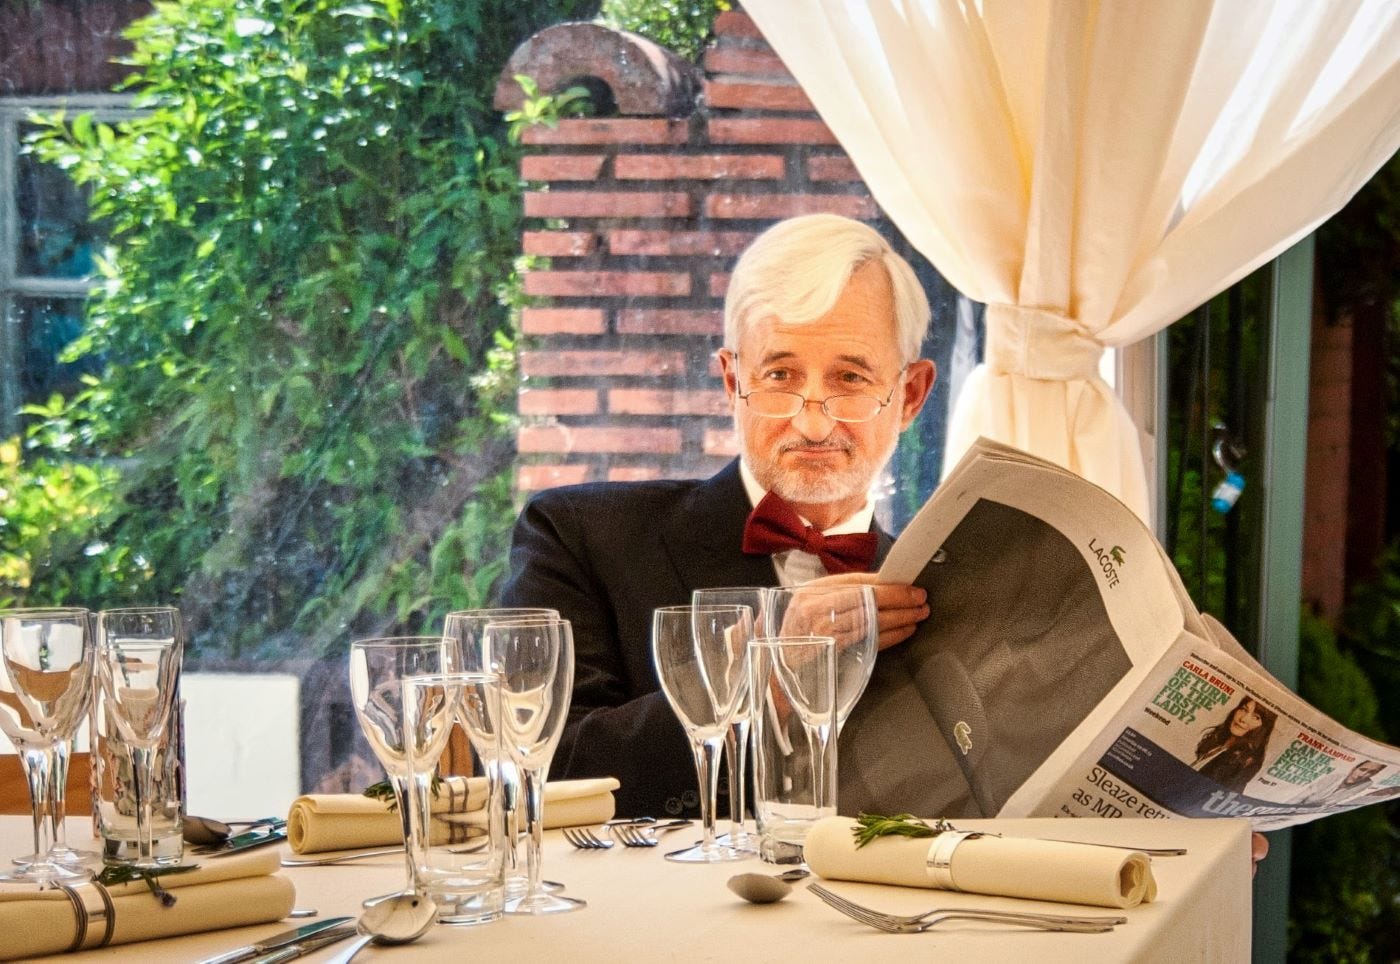 A man with white hair and a beard, wearing a suit and bowtie, is reading the newspaper at a table laid in a garden. He is looking up from reading the newspaper, with his reading glasses perched on his nose.